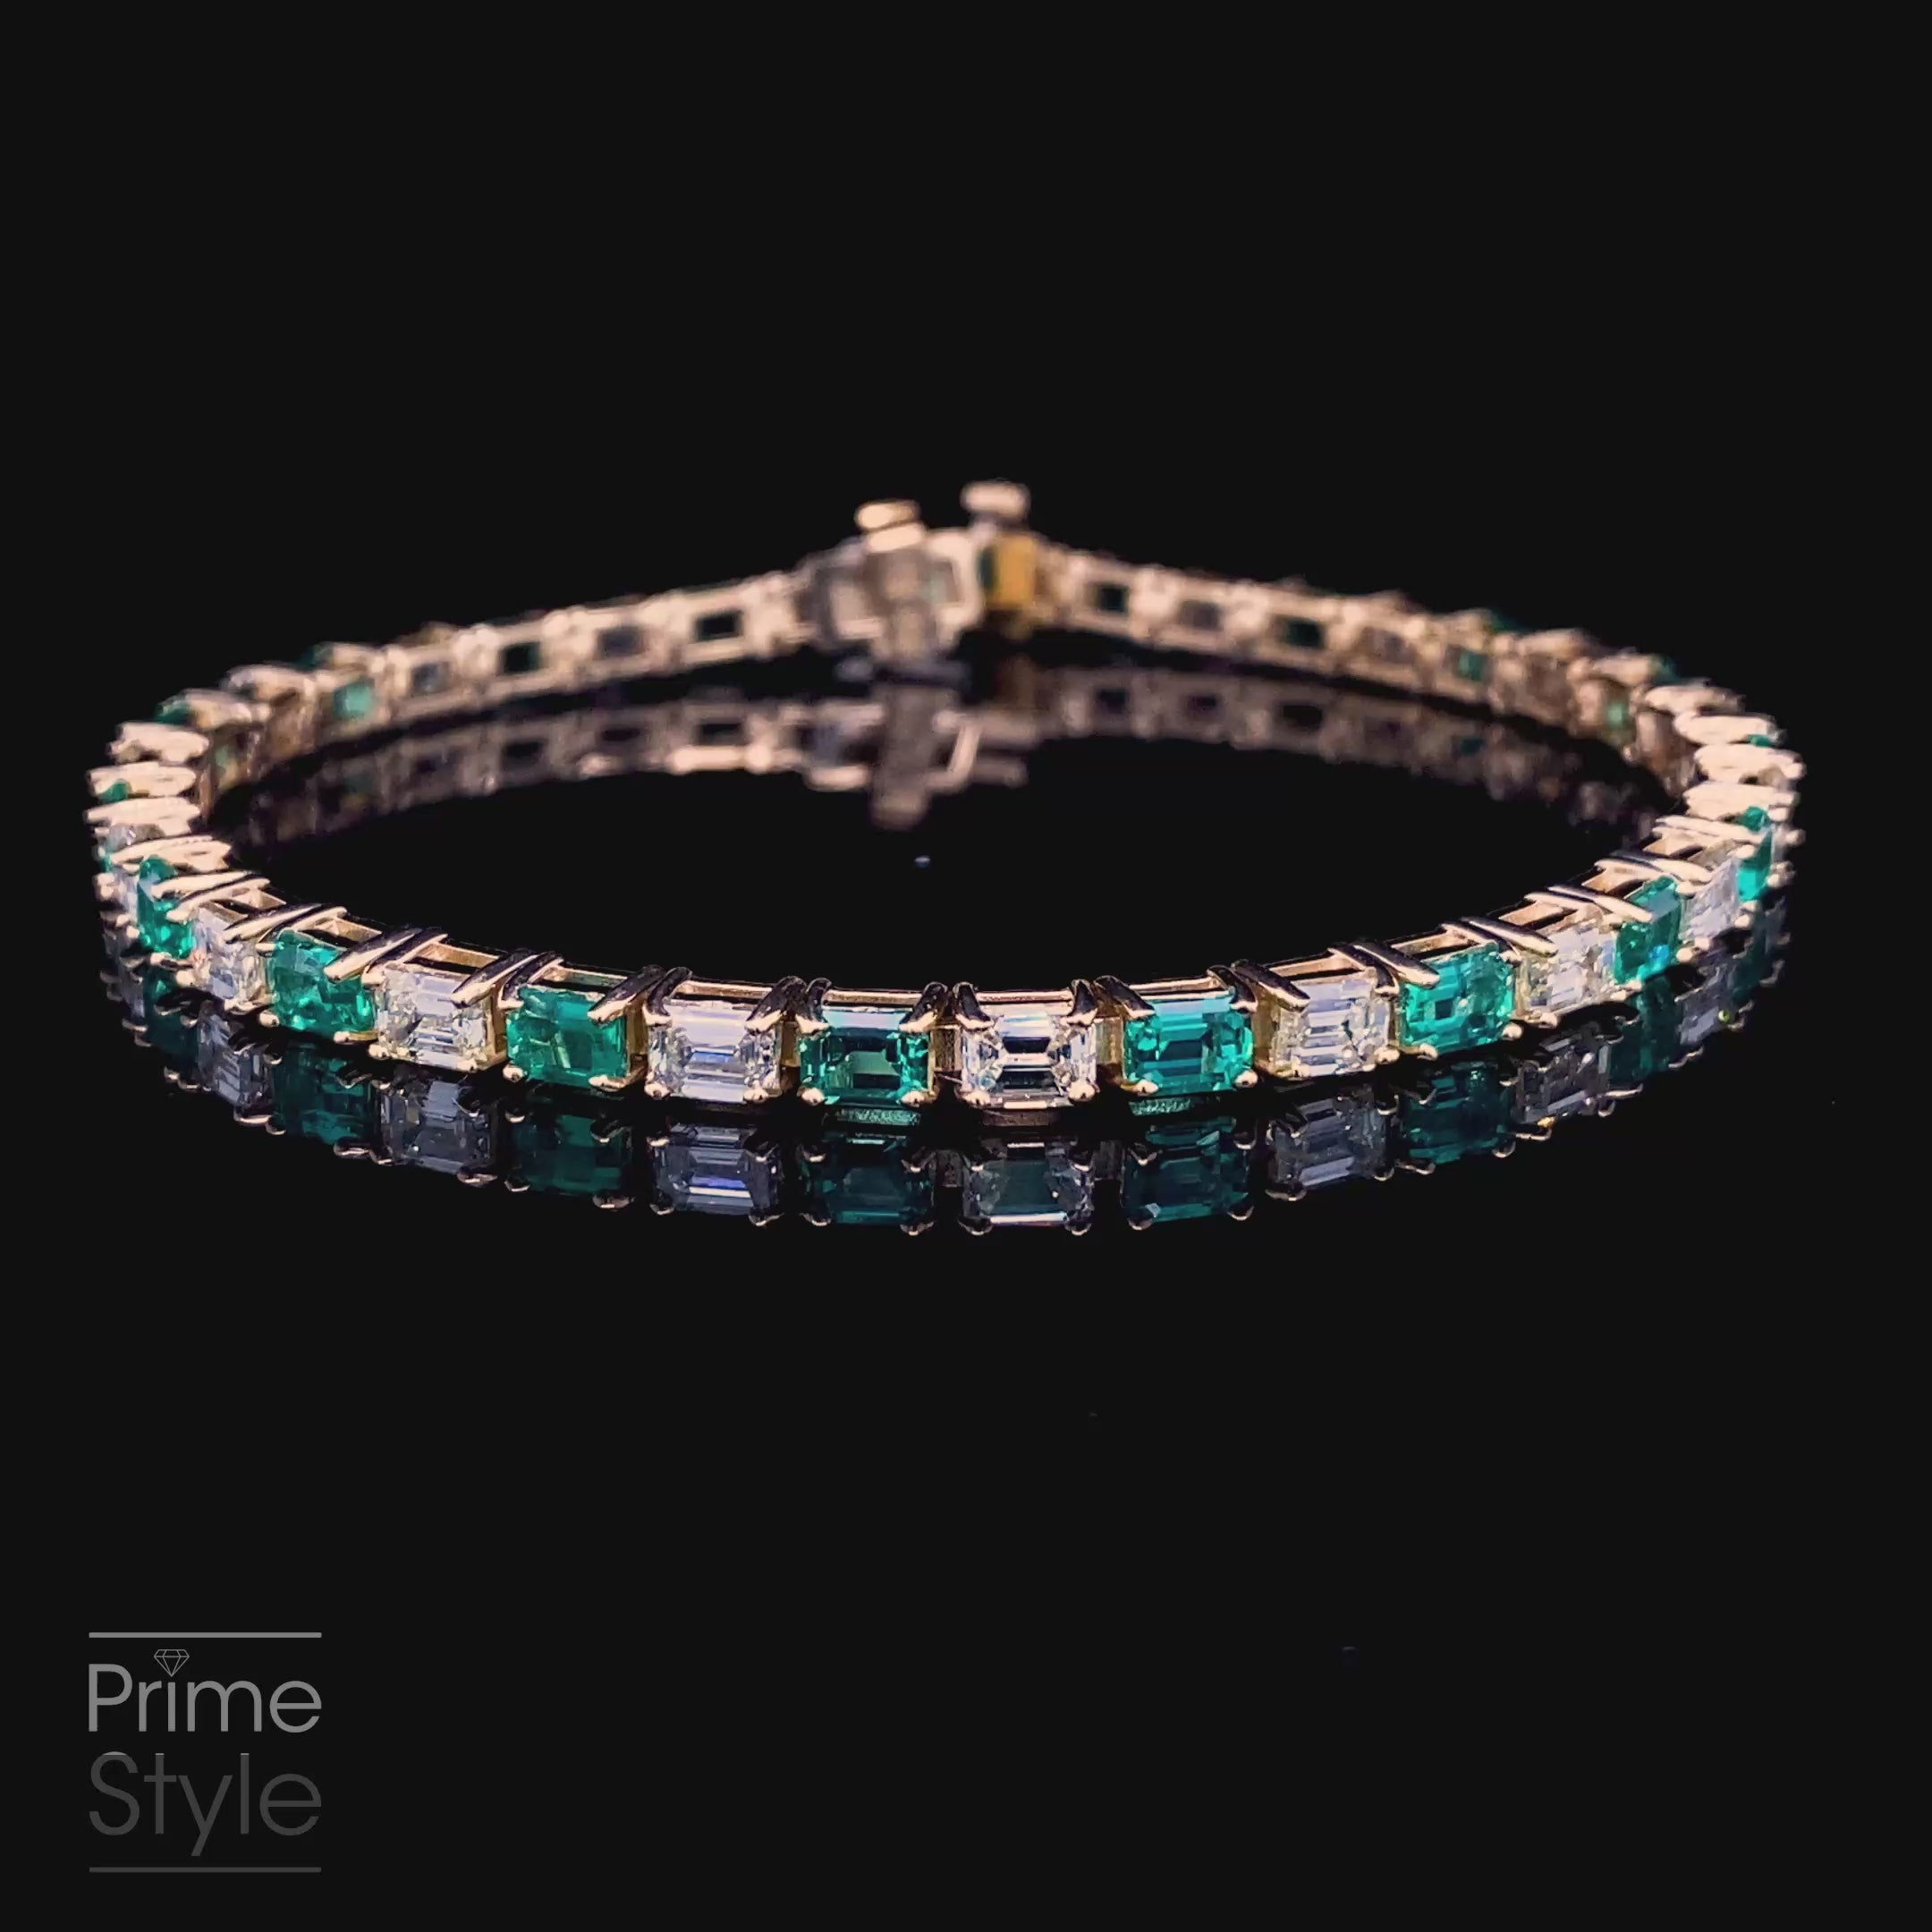 Extravagant 8.00CT Emerald Cut Diamond and Green Emerald Tennis Bracelet in 14KT Yellow Gold